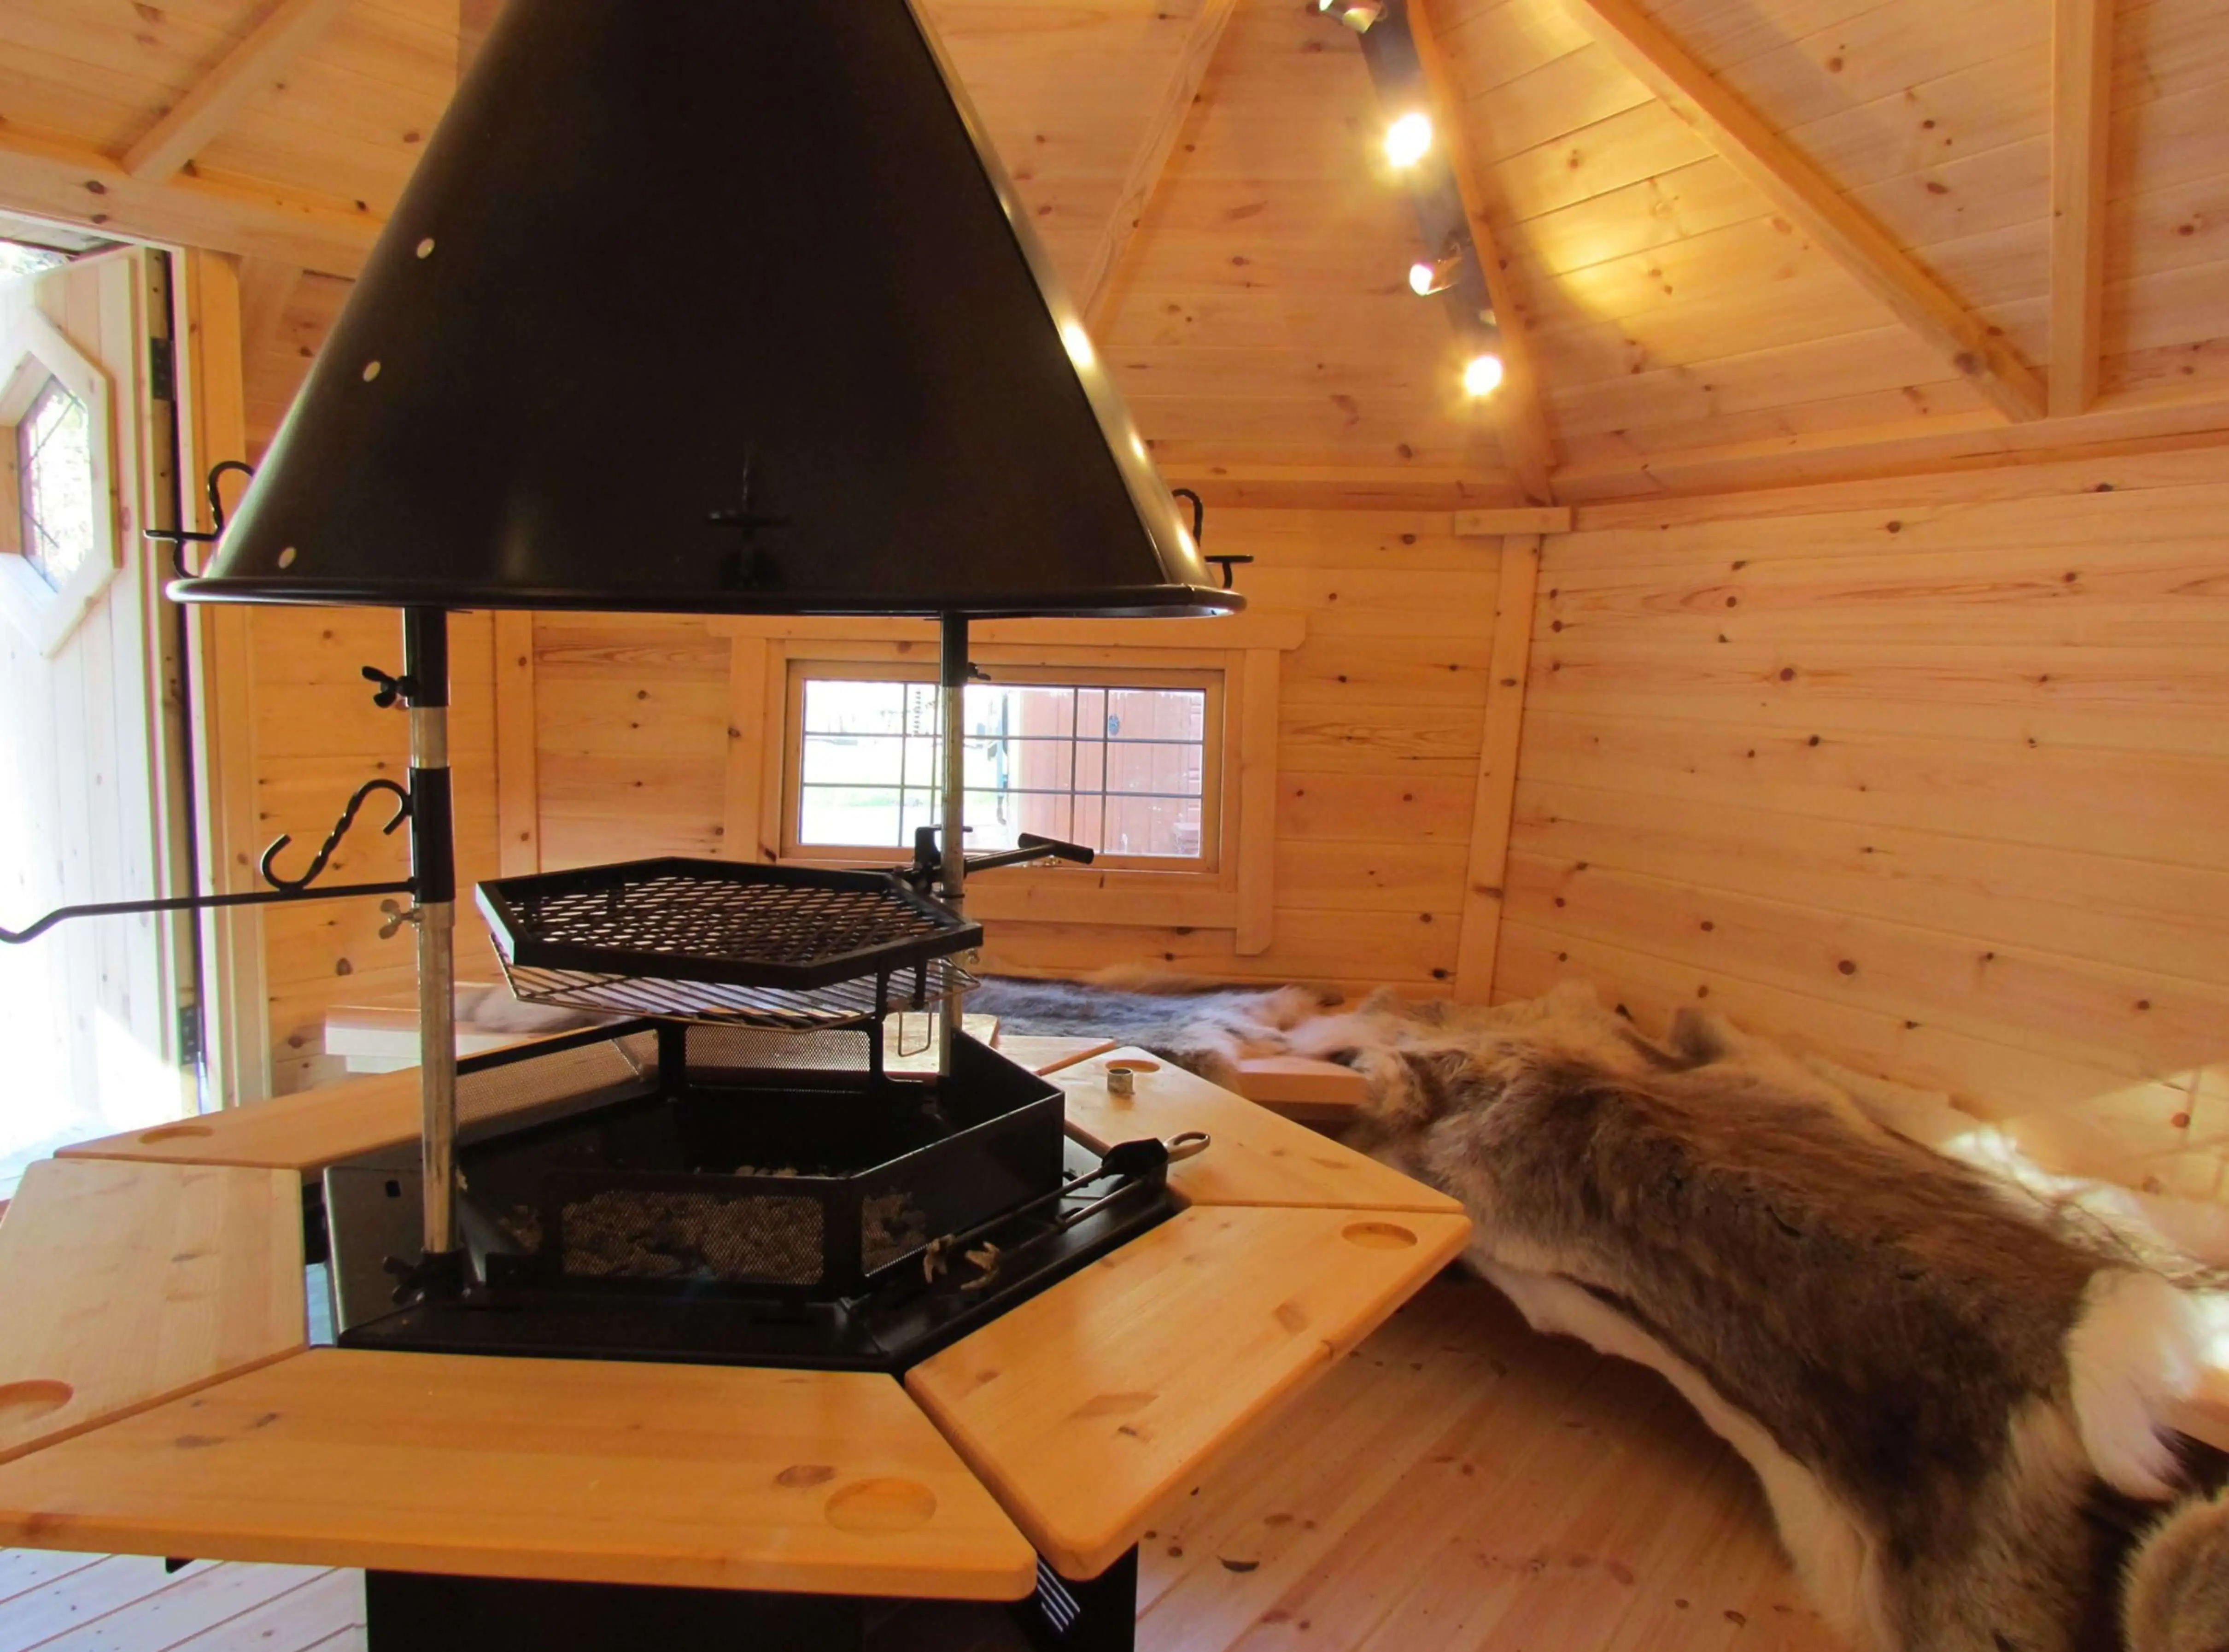 camping cabins inside view with bbq and reindeer skins and led lights grillkota hut